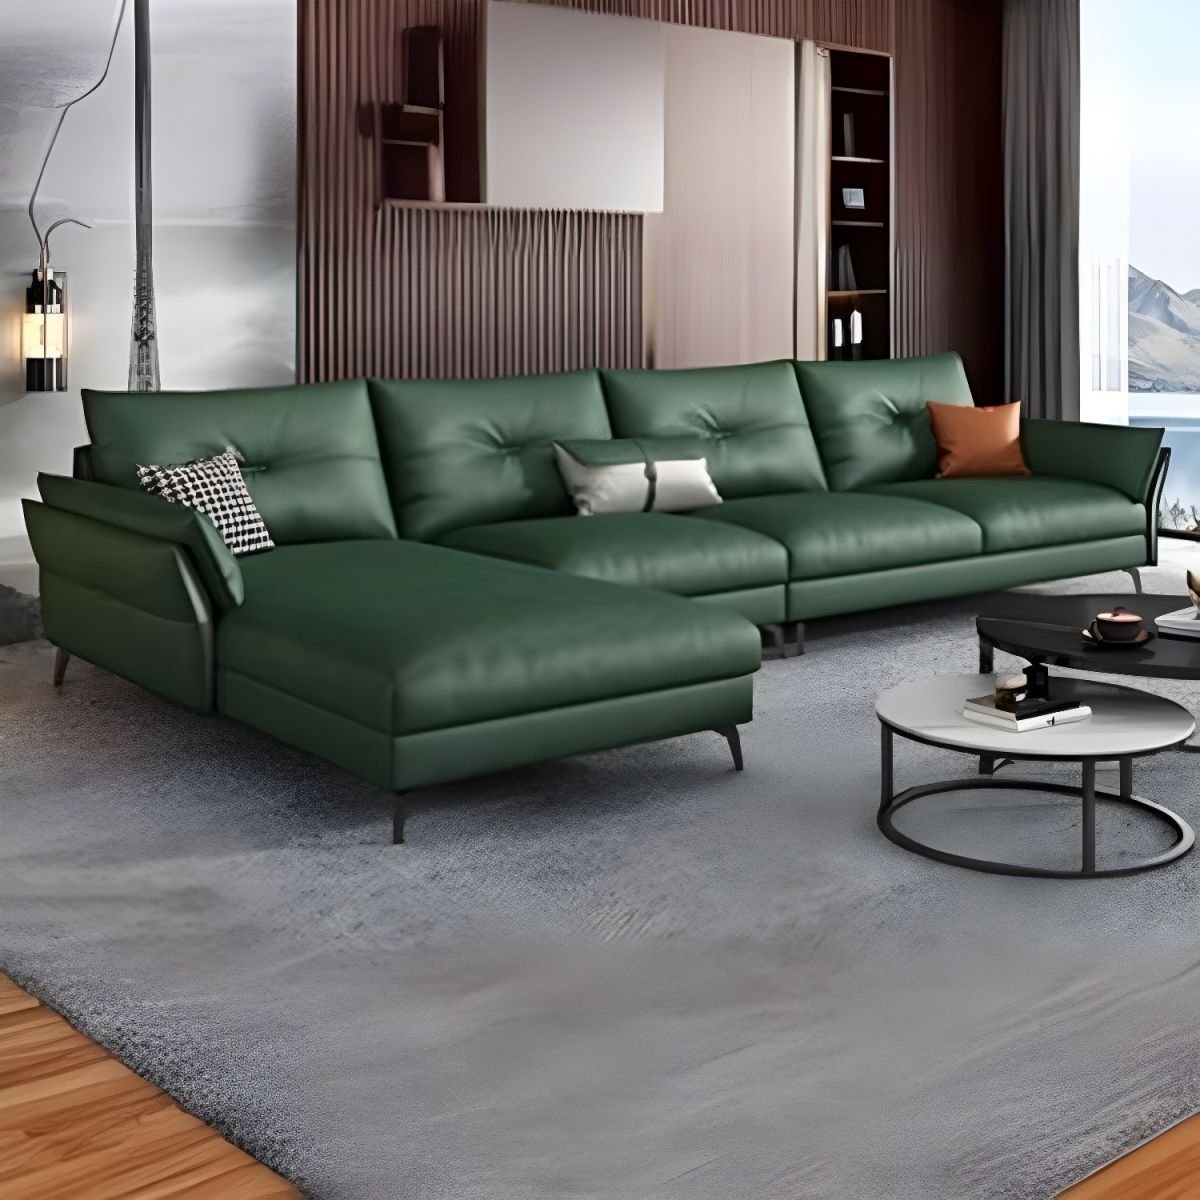 Faux Leather Modern Sectional Sofa with Flared Arm and Water Resistant - Green 126"L x 67"W x 31.5"H Tech Cloth